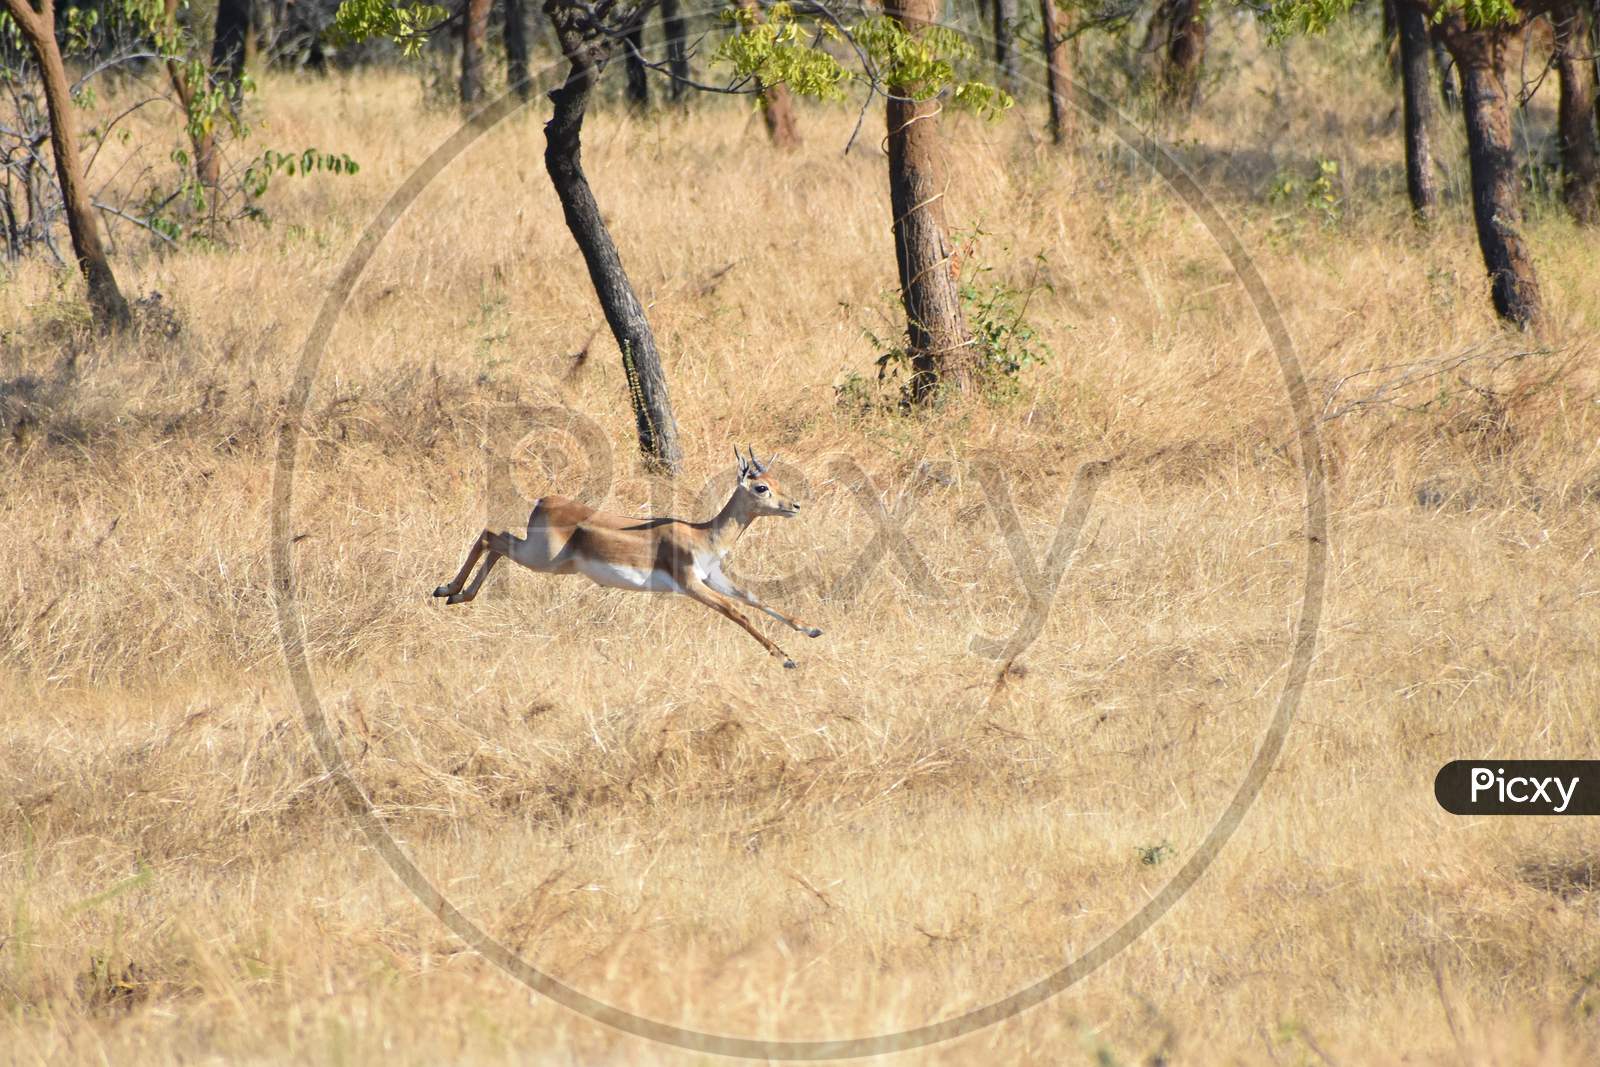 Deer jumping in air in forest